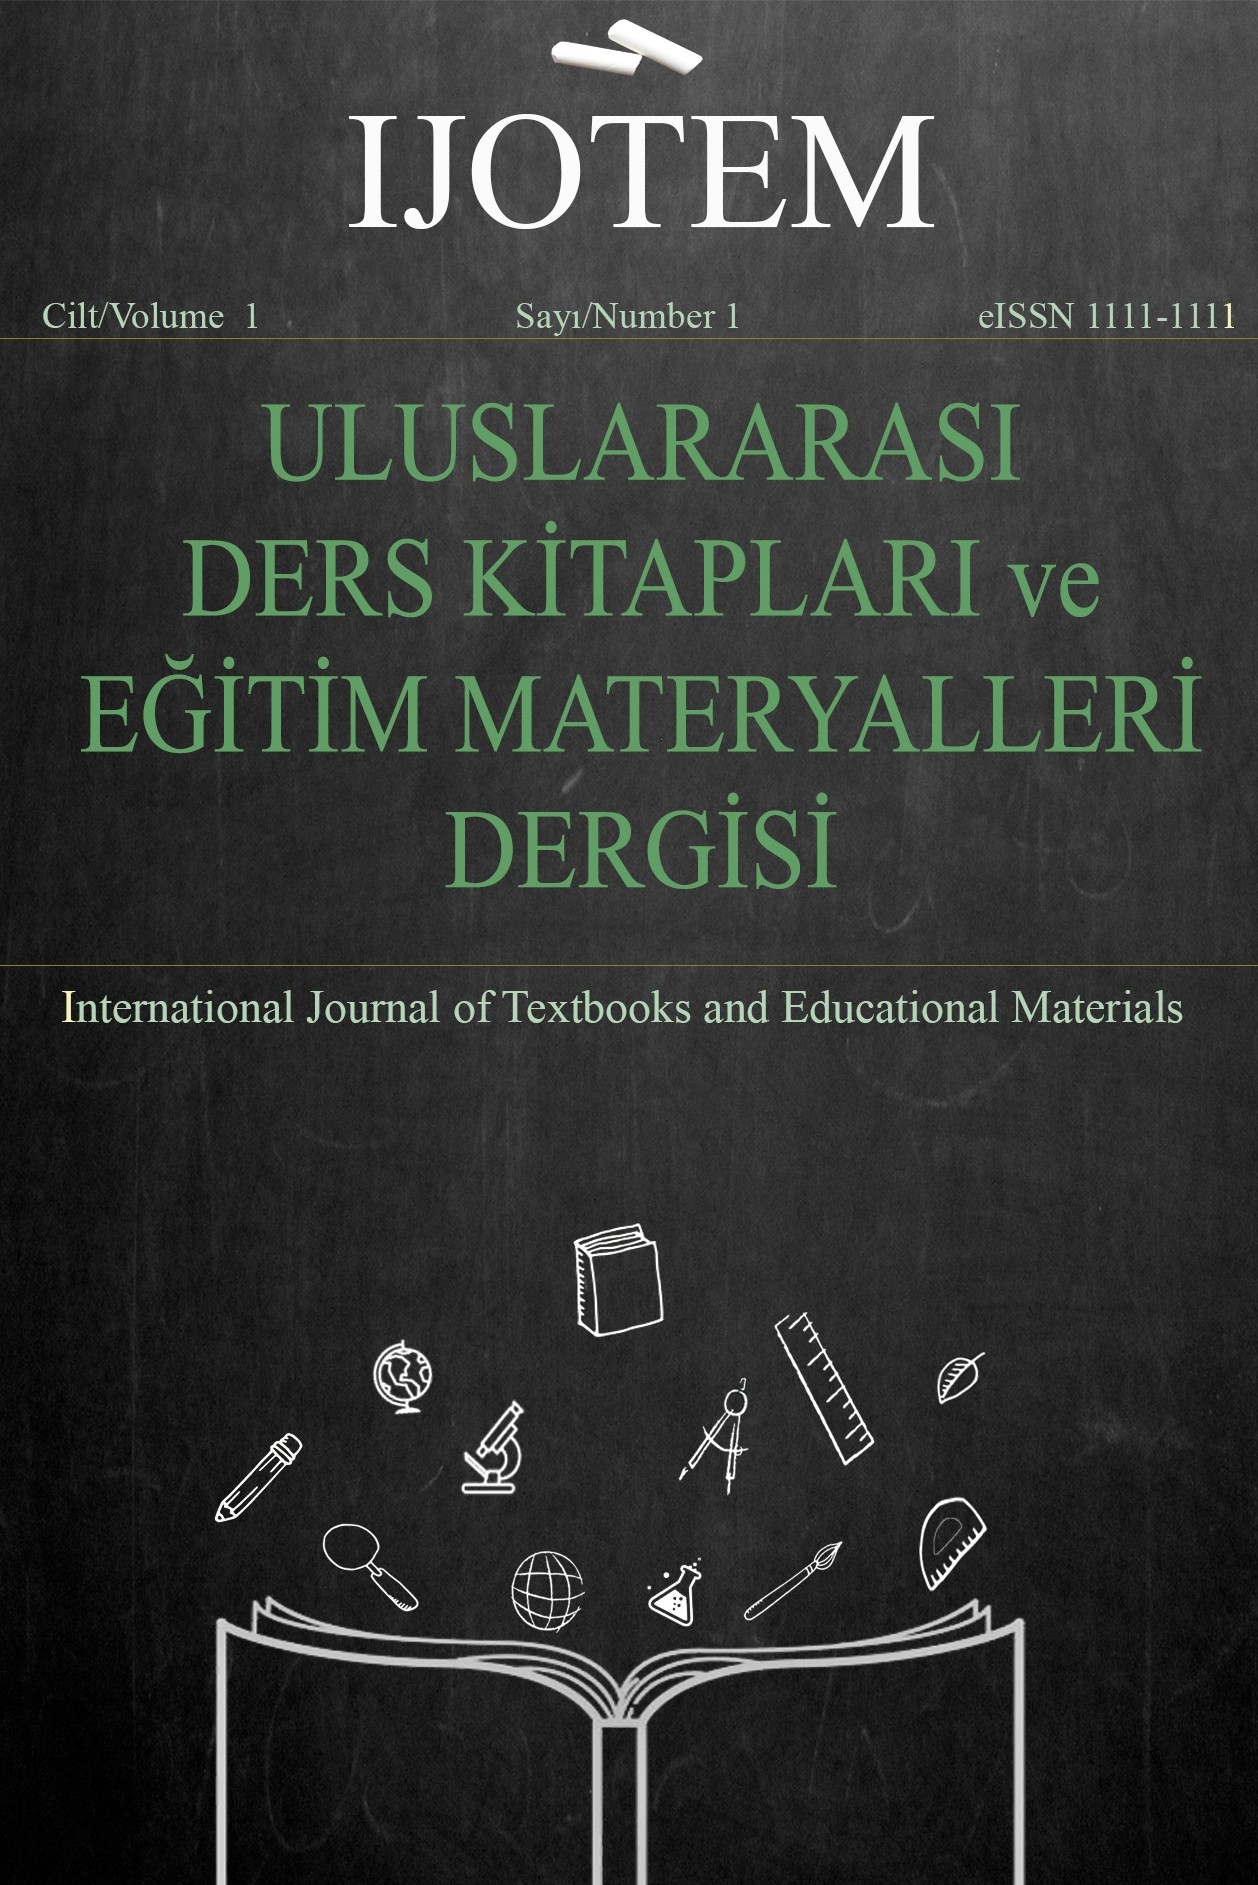 International Journal of Textbooks and Education Materials